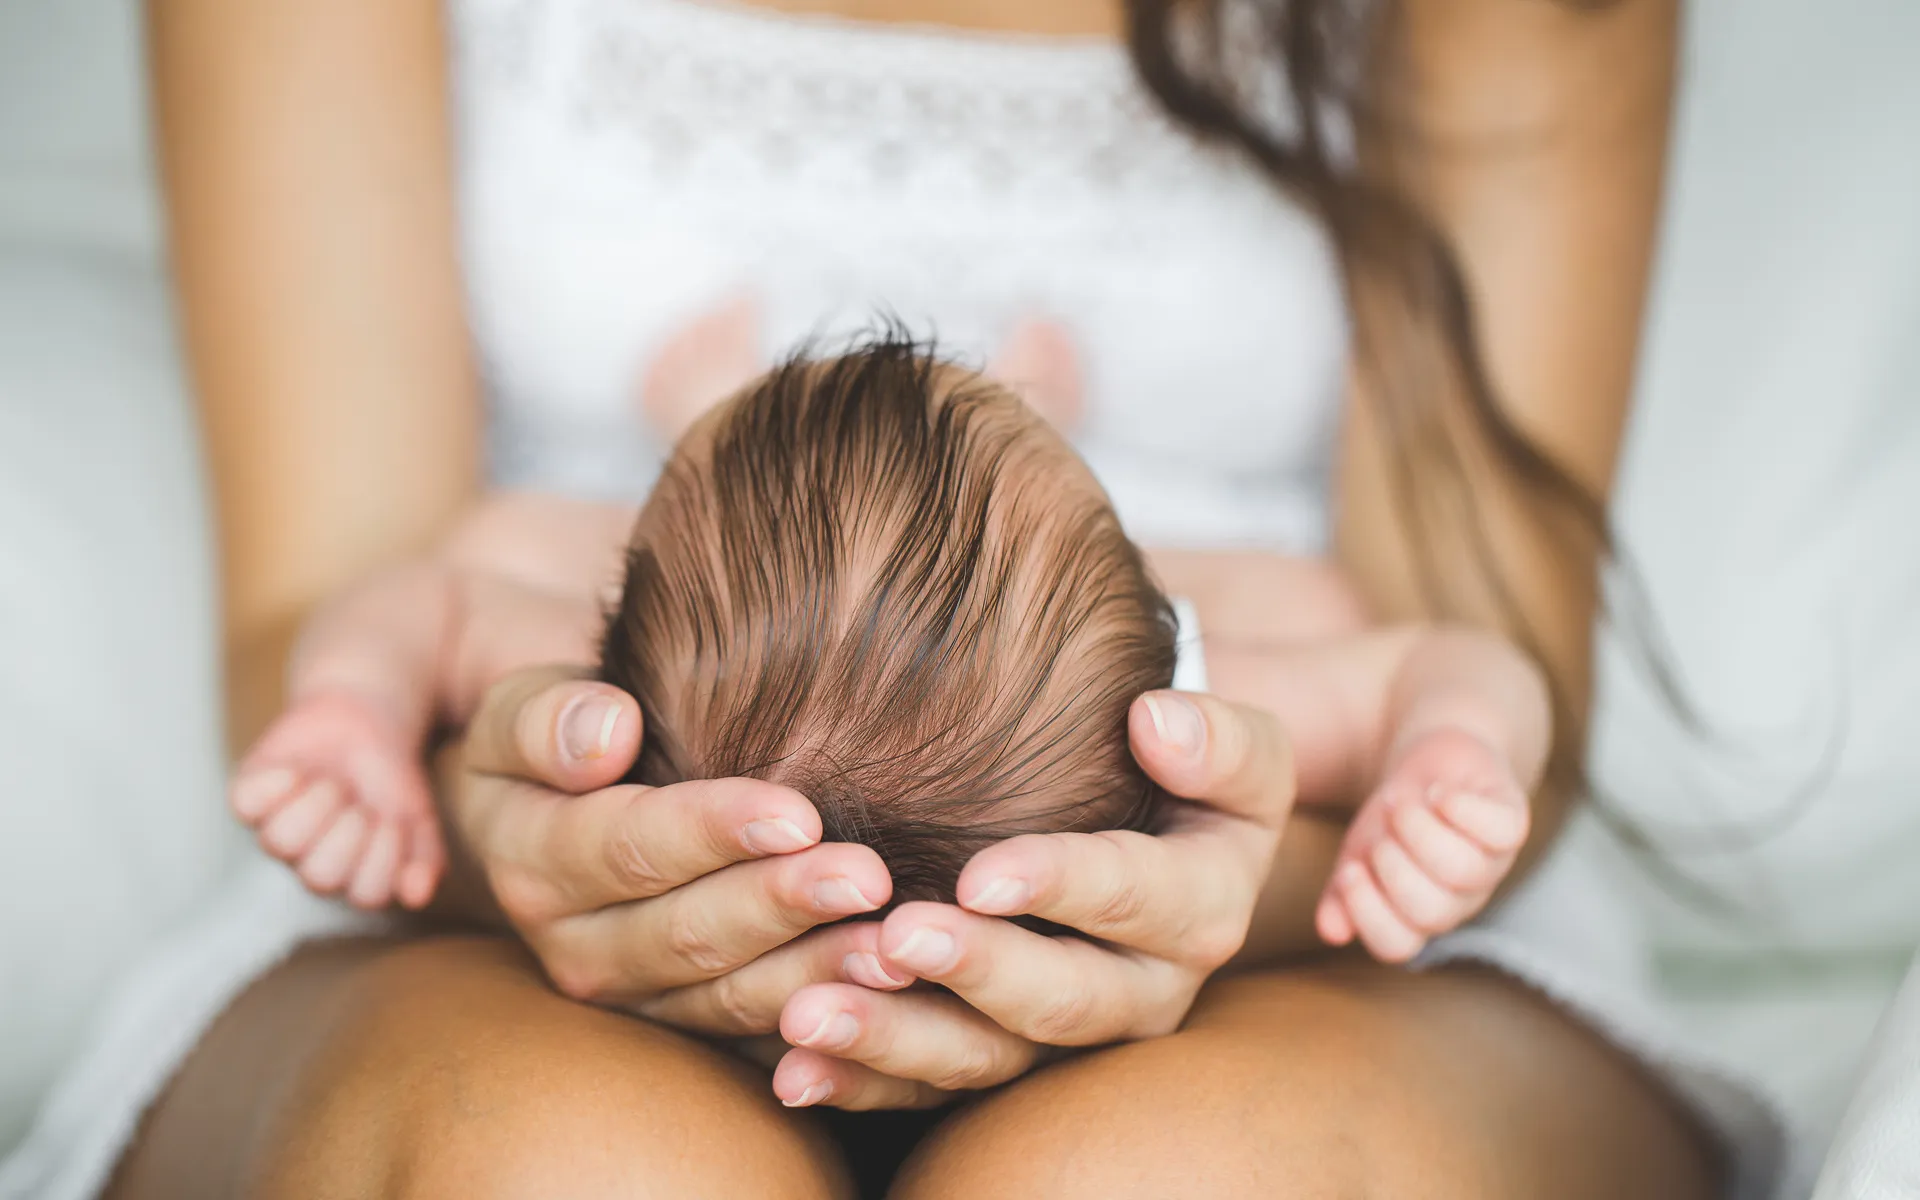 20 Things Women Who Don’t Have Kids Want You to Know